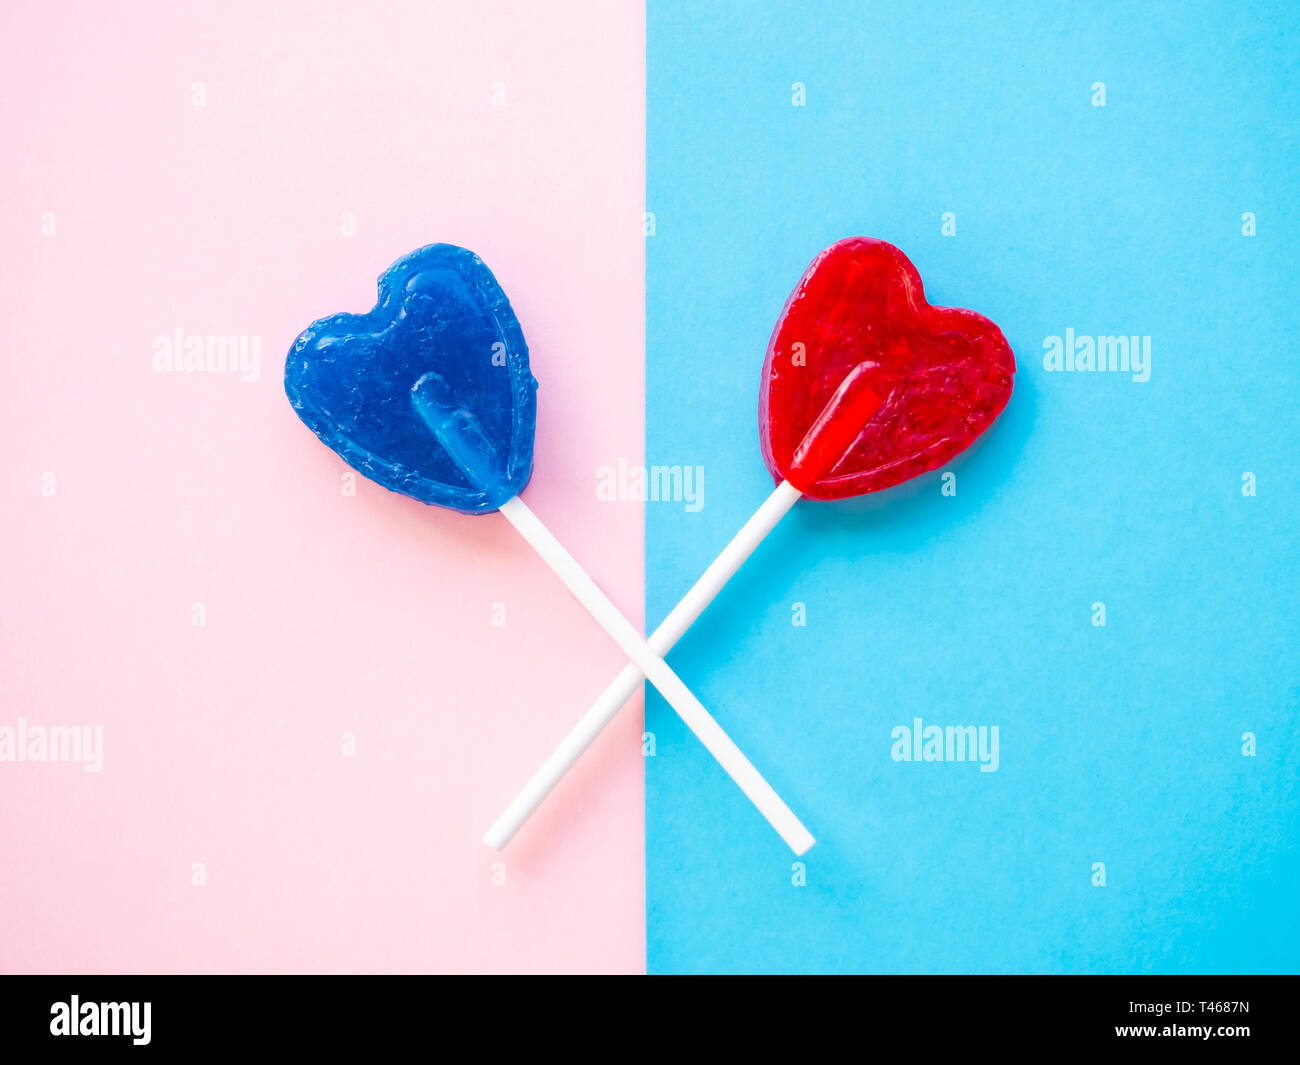 Red and blue lollipops on a pink and blue background Stock Photo